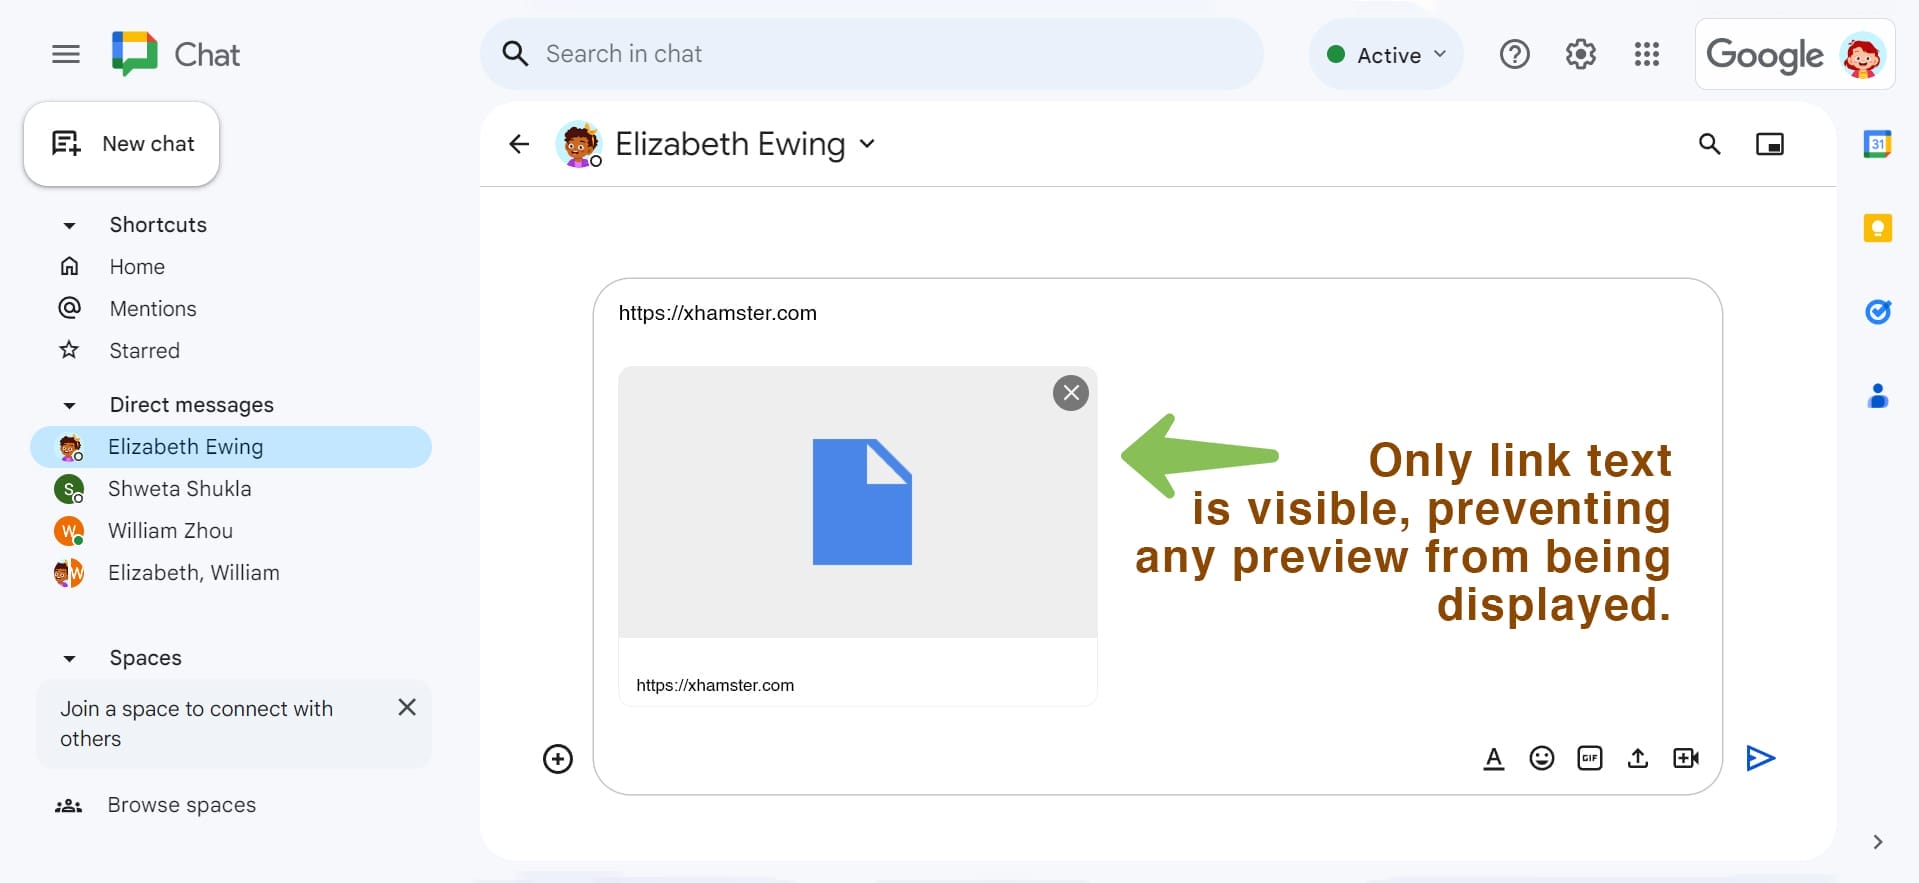 Google Chat with blocking link previews using Safe Doc